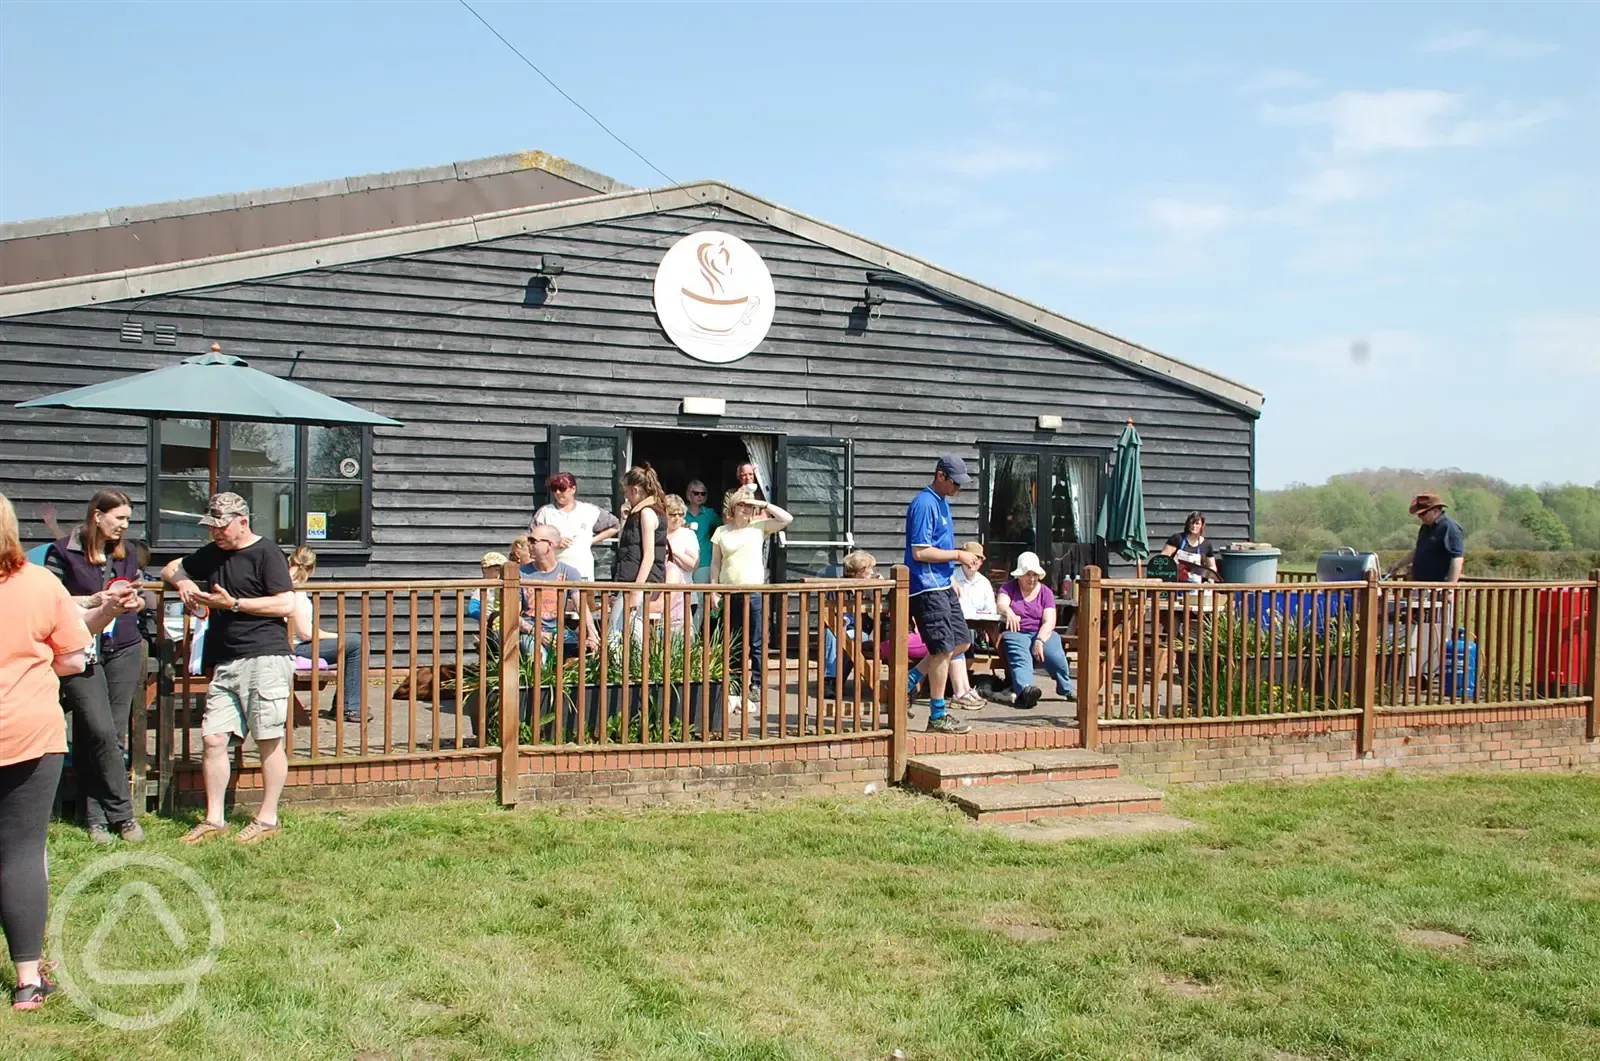 Cafe on site, serving meals and refreshments.